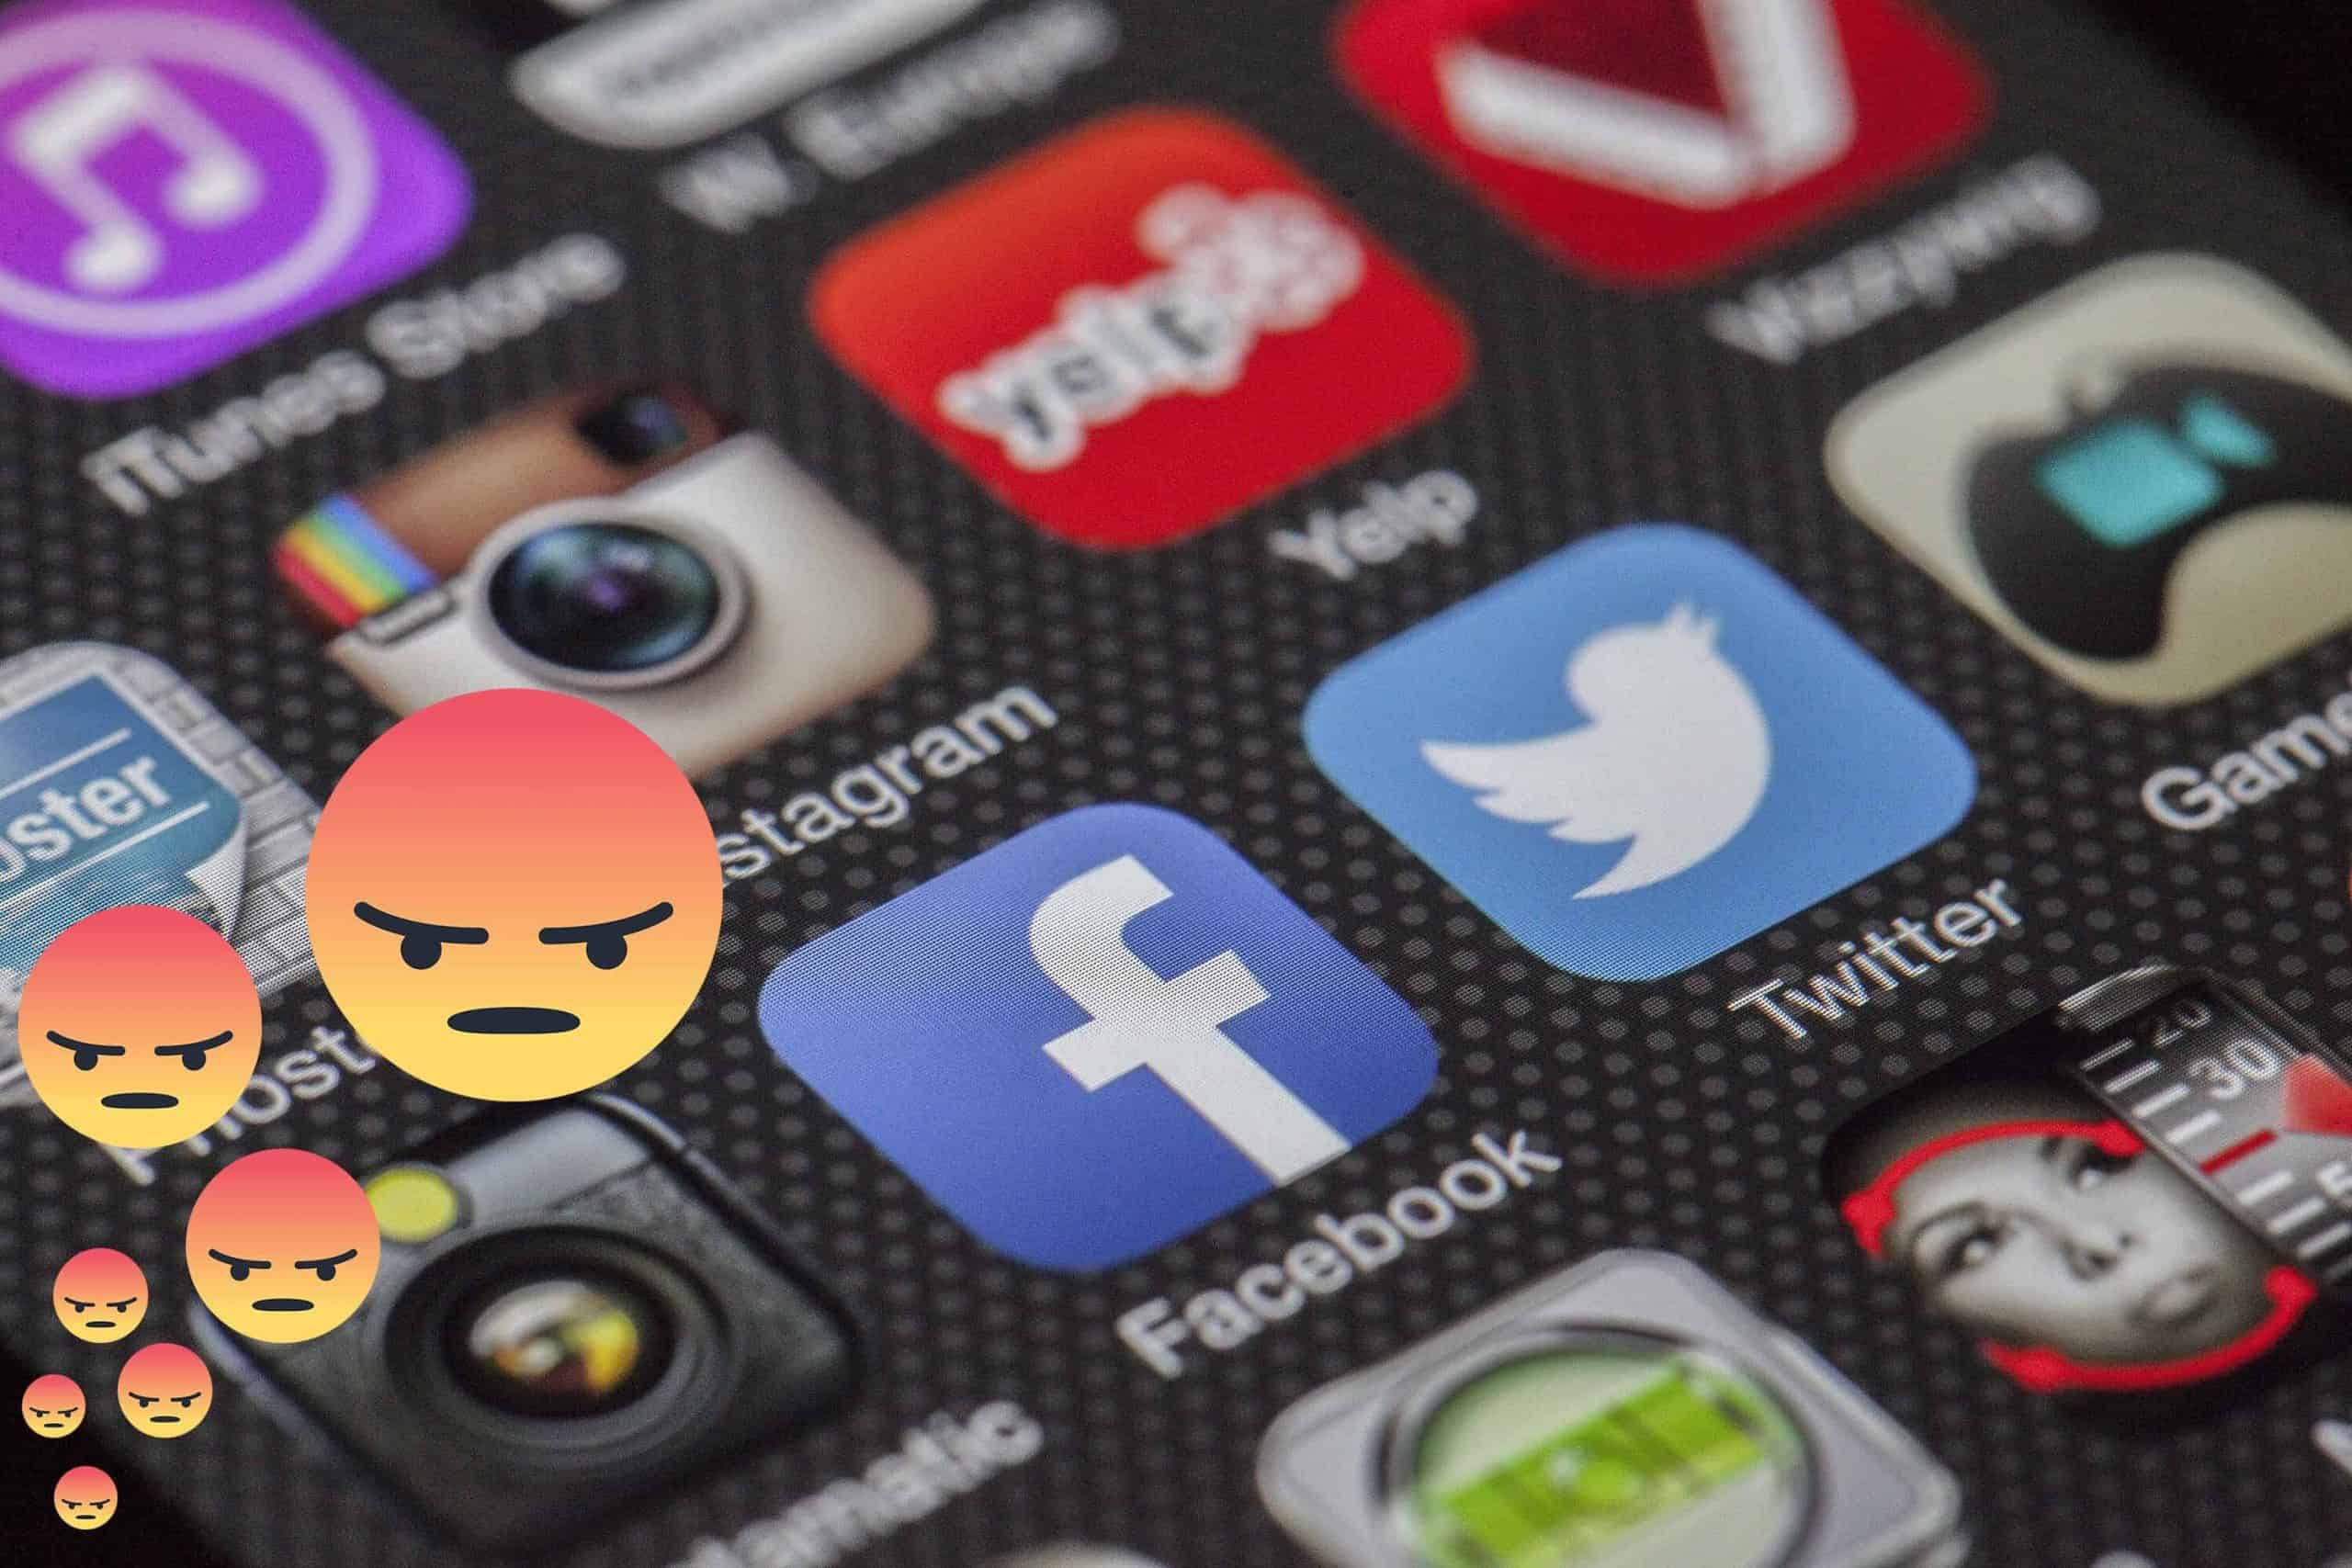 Brexit causes 298% rise in angry reactions on social media